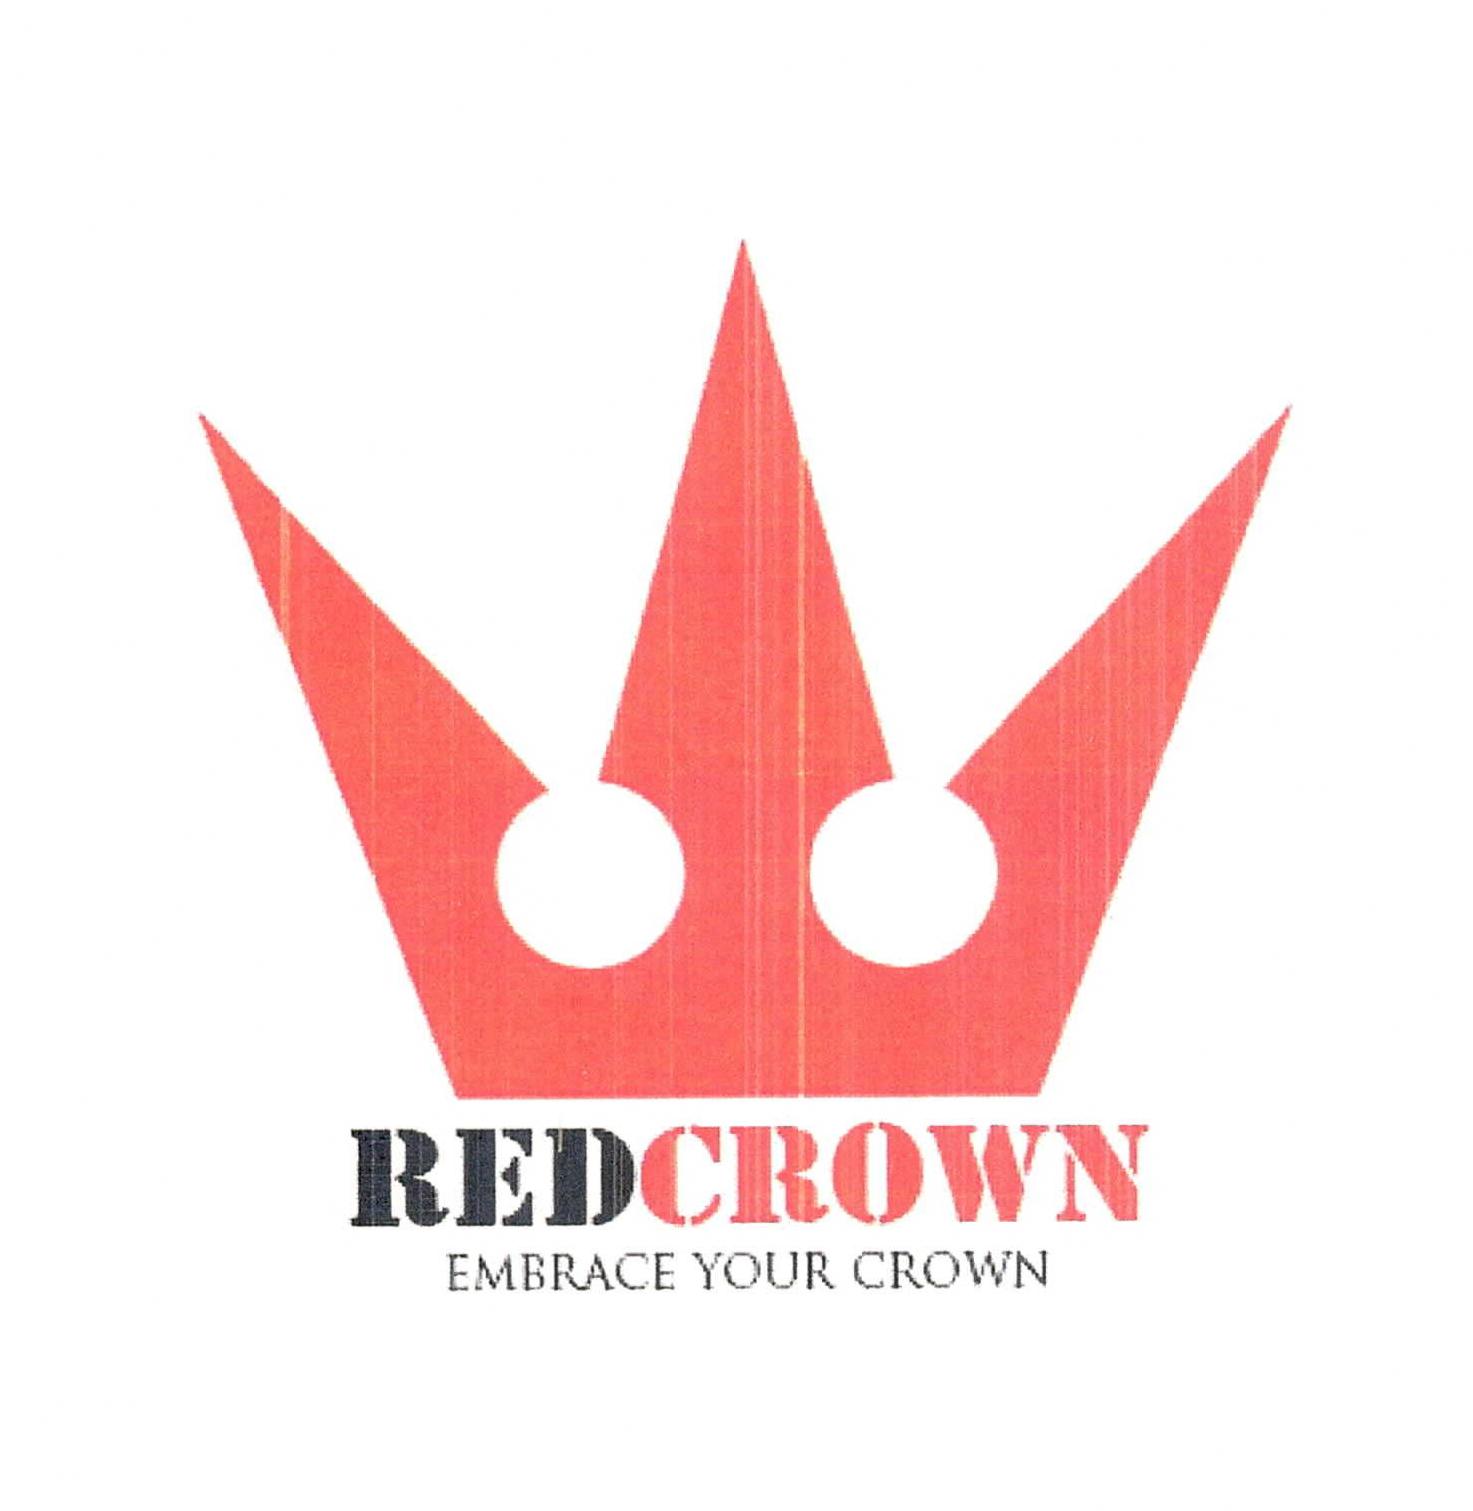 REDCROWN